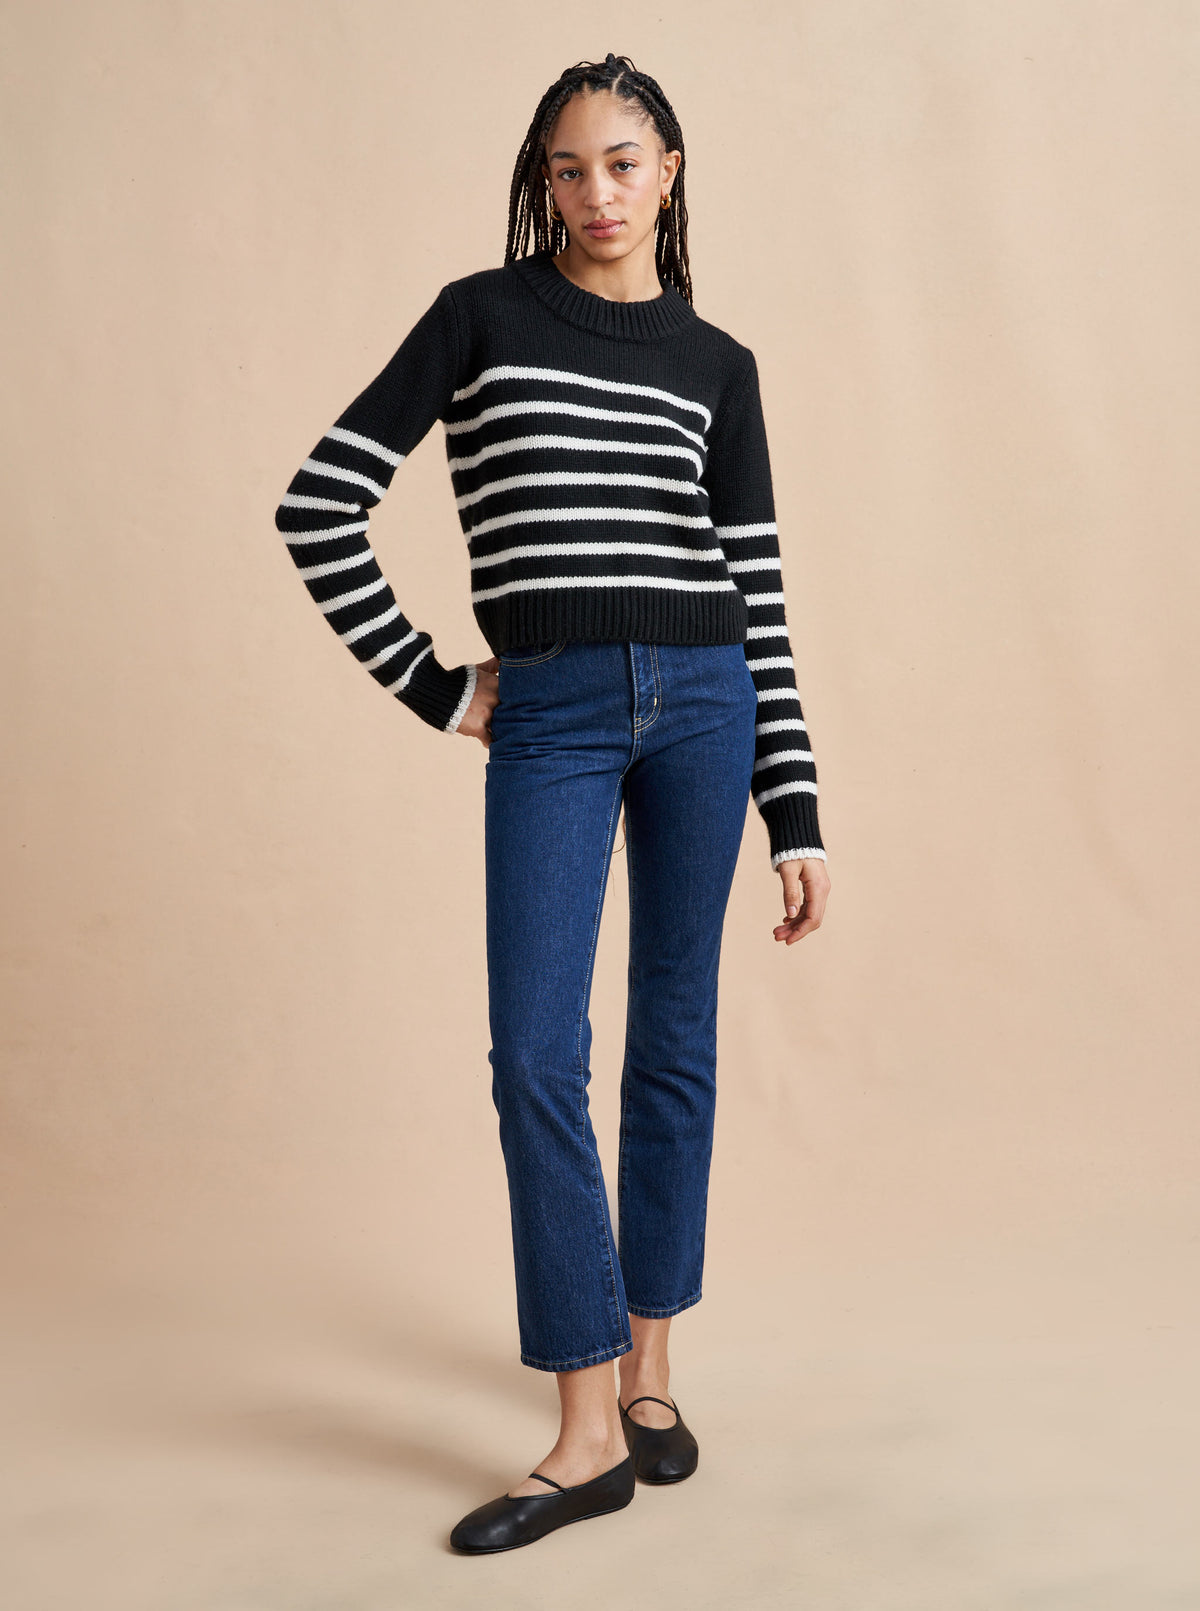 Get on board with our black with cream stripe, 7-ply wool-cashmere sweater, shrunken and slightly cropped, but as always, comfort and style not mutually exclusive.